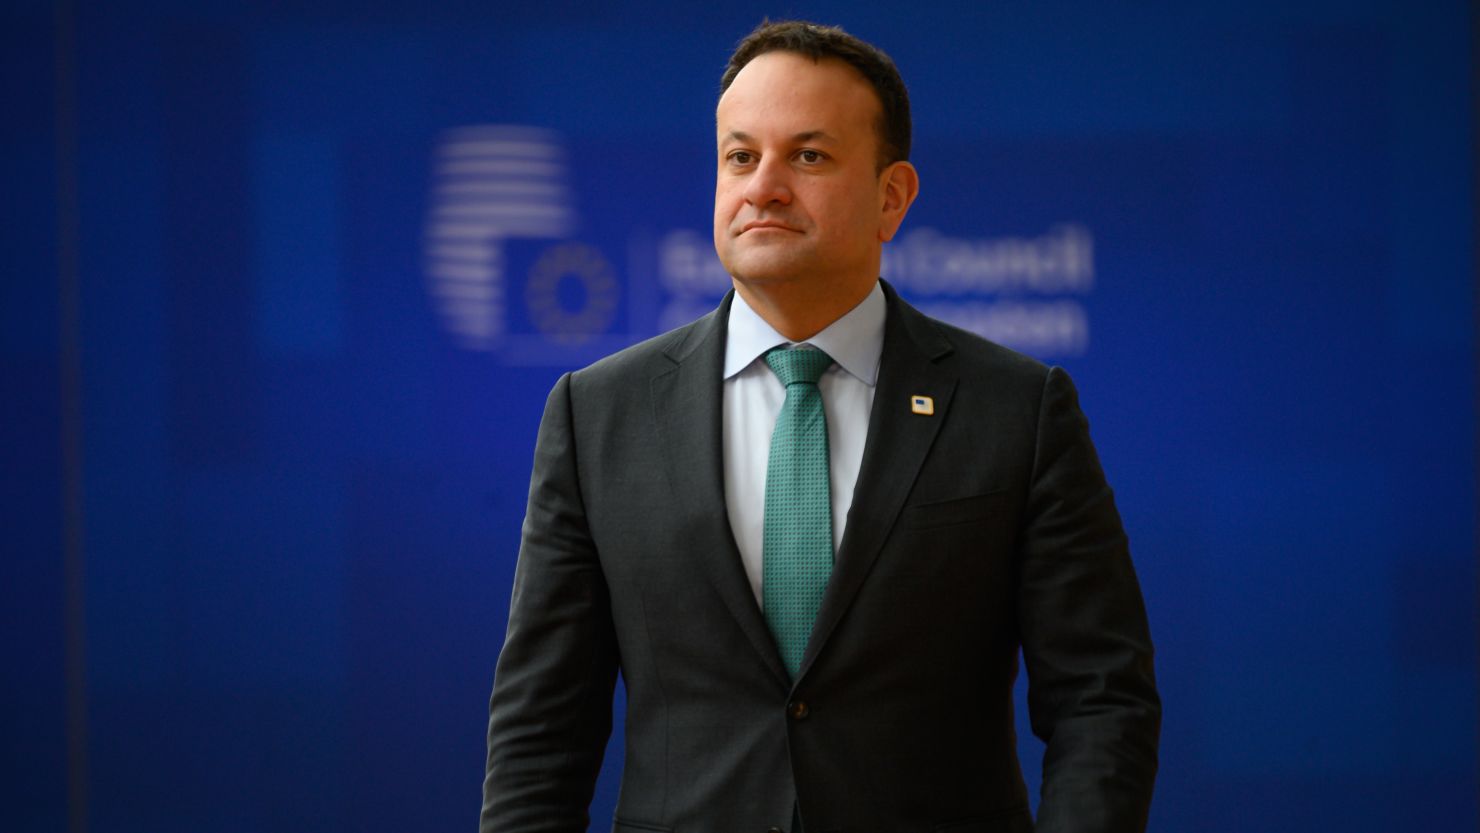 Leo Varadkar, Ireland's youngest premier and first gay leader, announced last week that he is resigning from his role as Prime Minister.